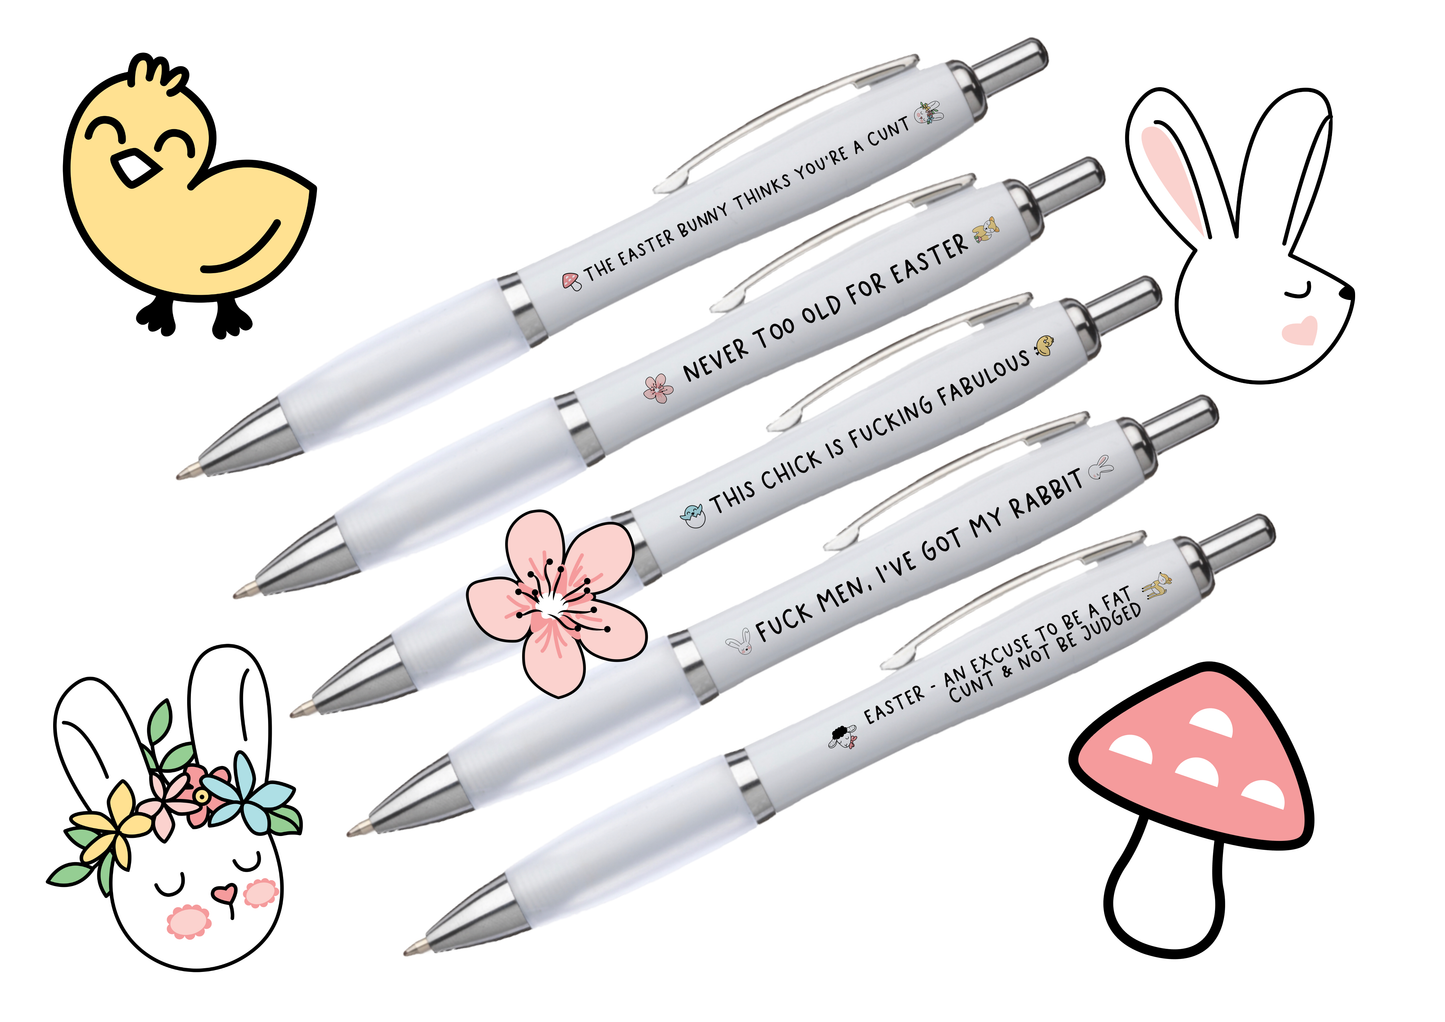 5 pack of white barrel easter pens with funny quotes printed to one side such as, the easter bunny thinks you're a cunt, fuck men, i've got my rabbit & this chick is fucking fabulous'. Printed in black ink with colour easter pictures surrounding the text.